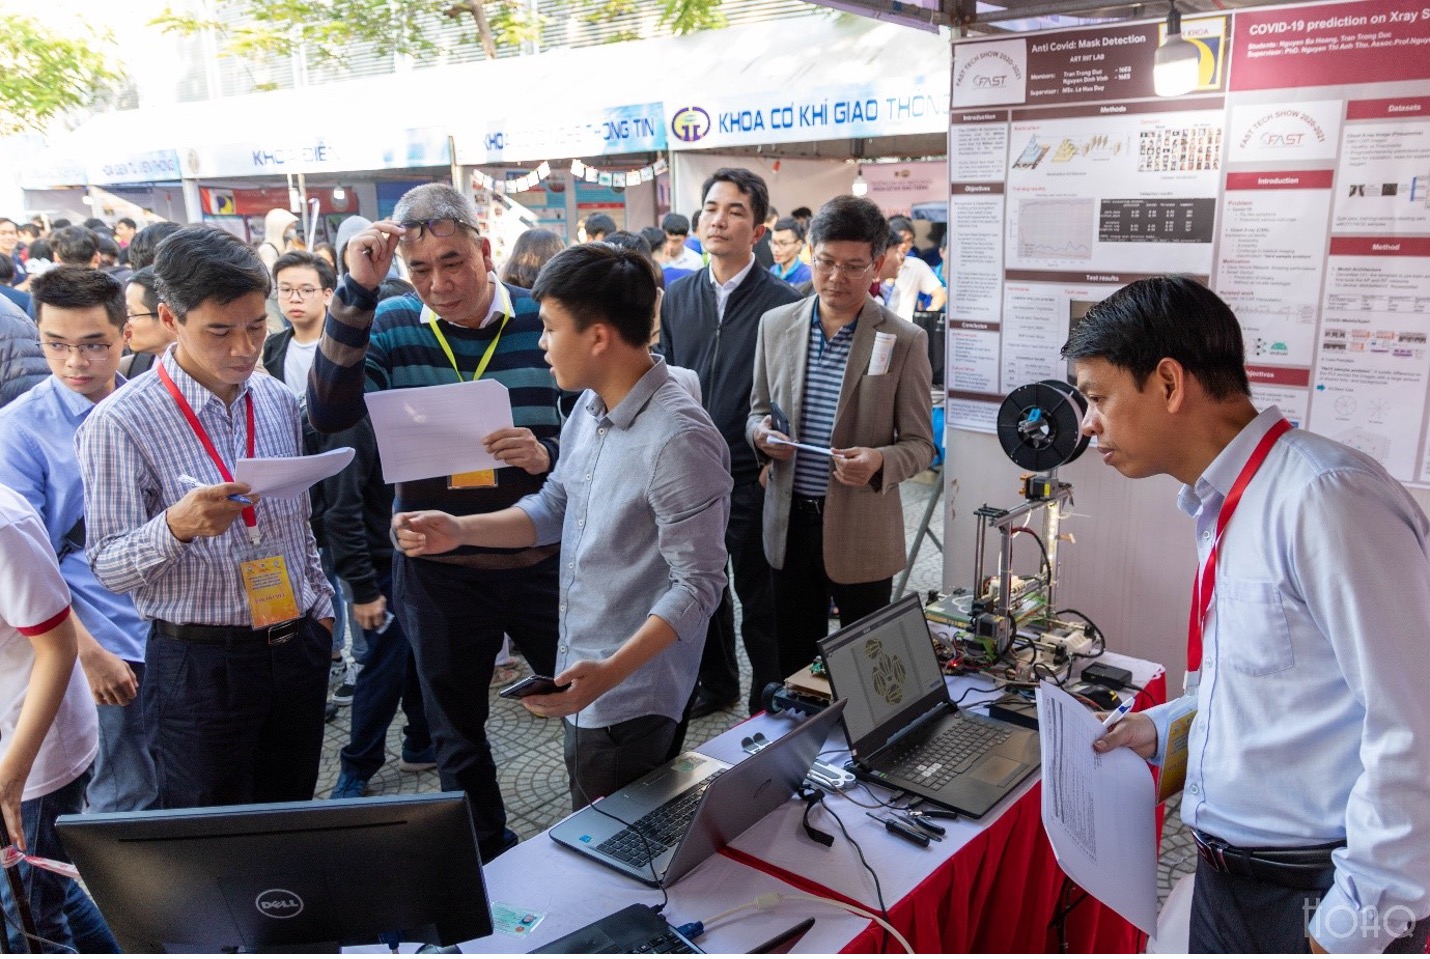 The Faculty of Advanced Science and Technology makes its mark at the Science Conference and Technology Exhibition of students in 2021